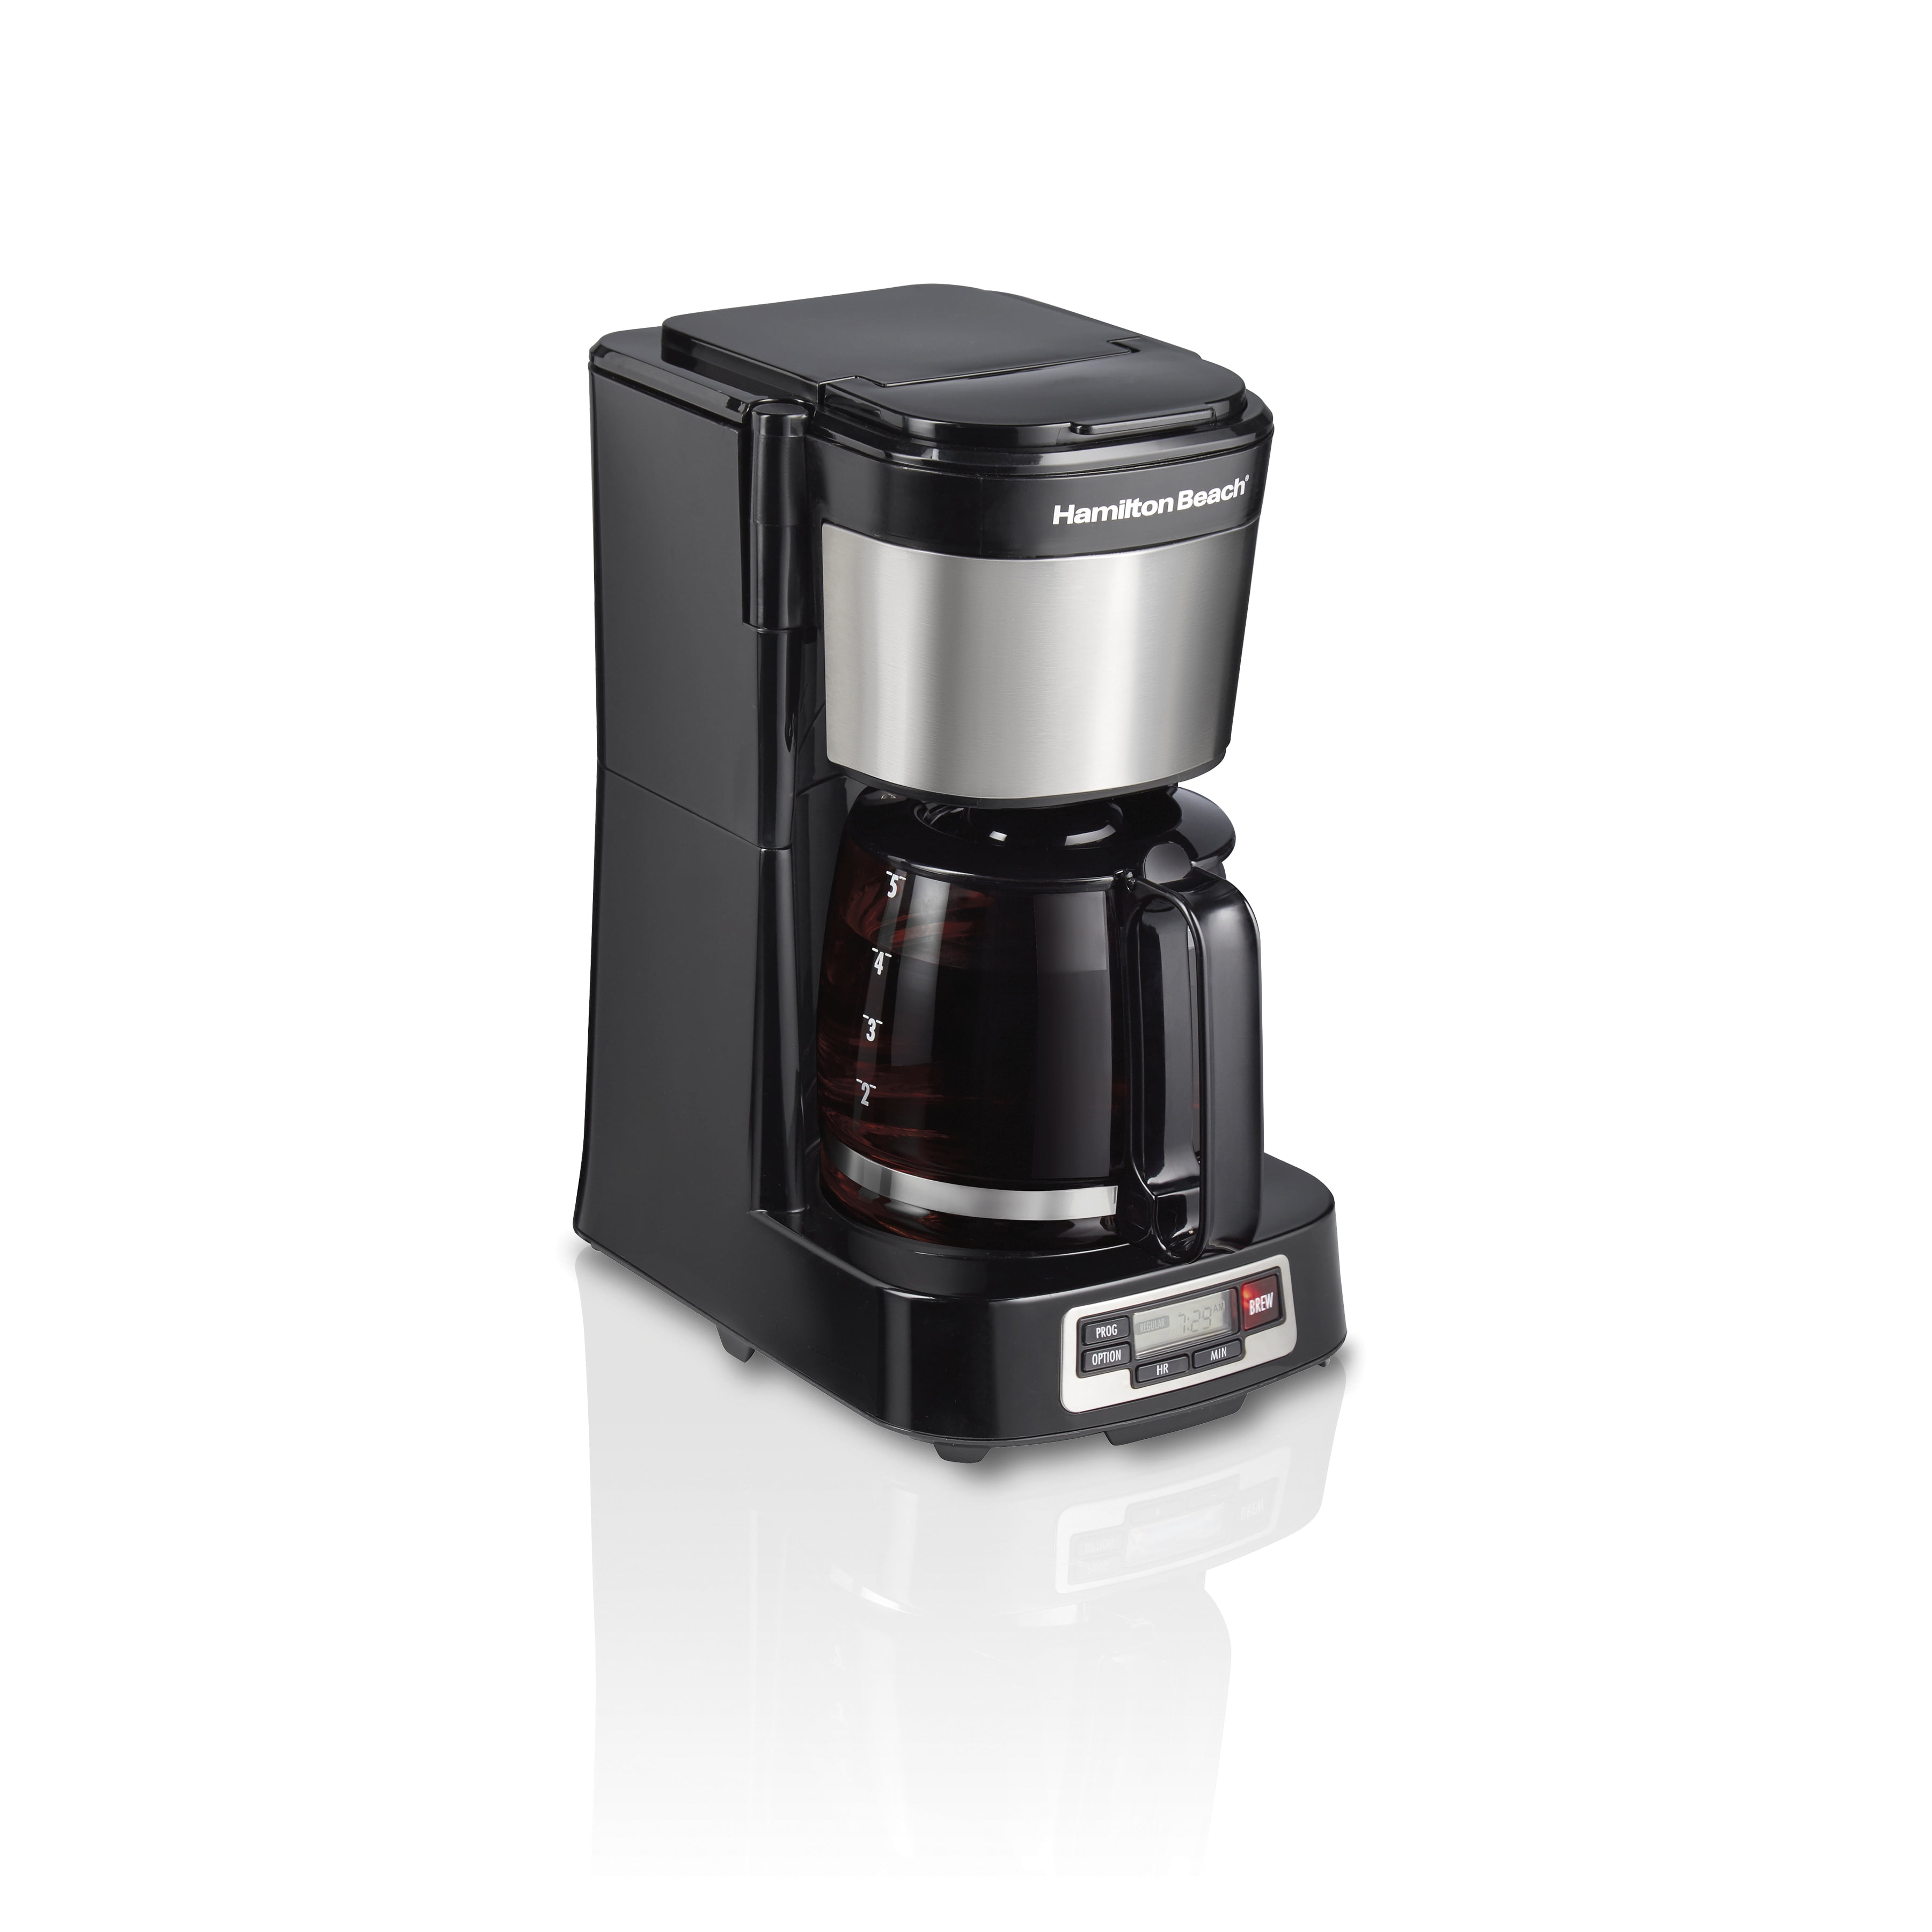 Hamilton Beach 5-Cup Black Compact Coffee Maker with Programmable Clock & Glass Carafe 46111